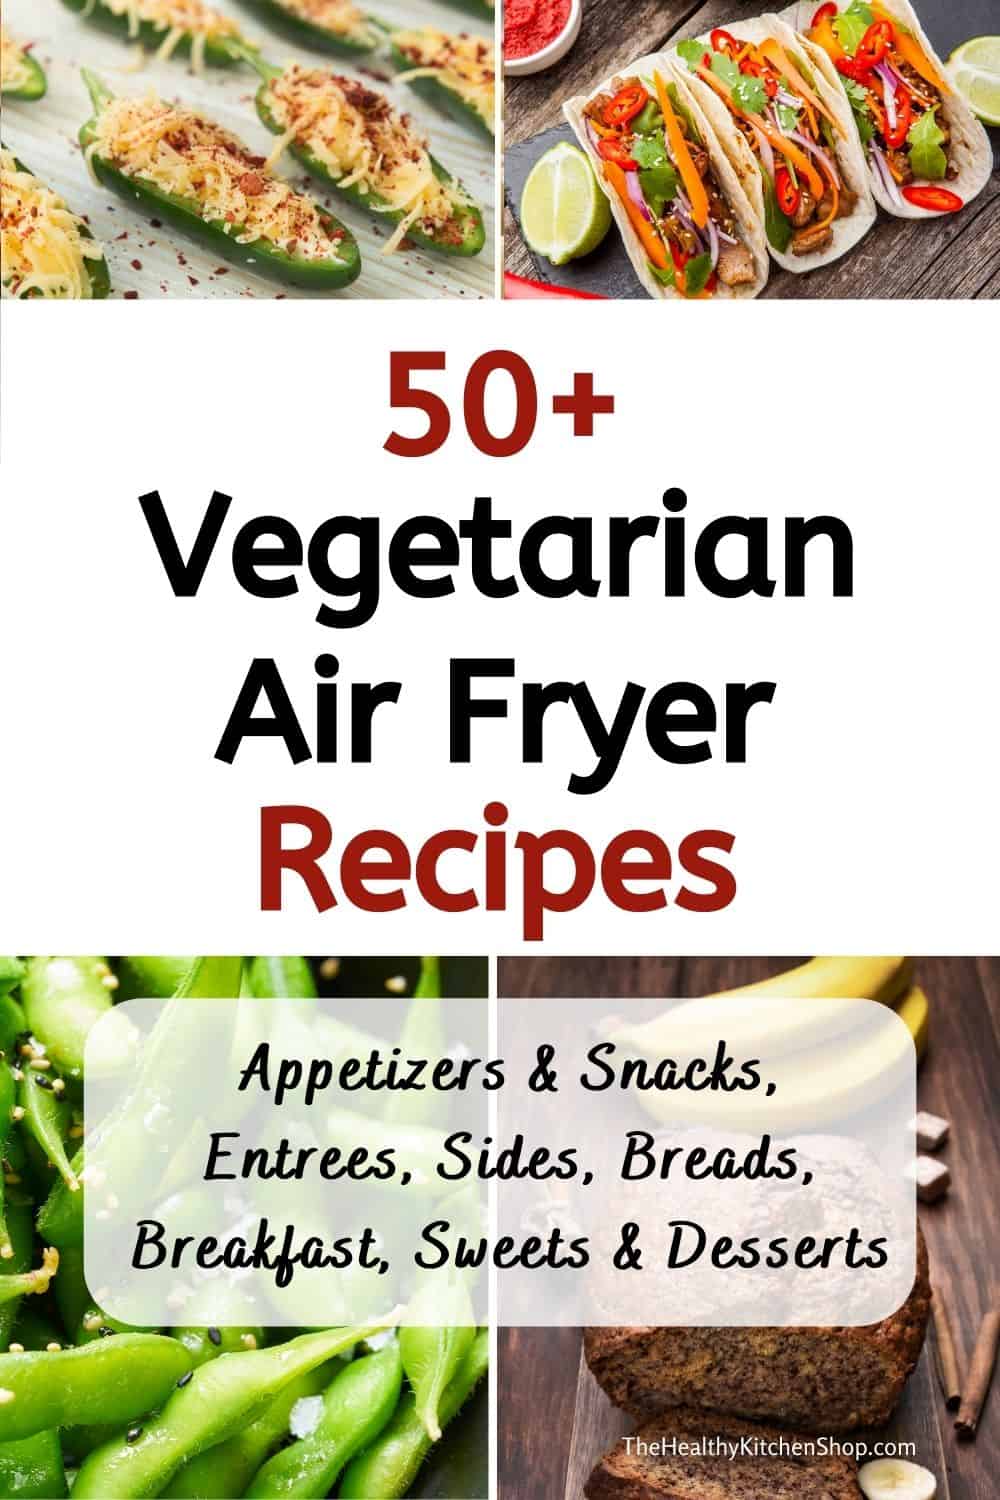 Vegetarian Air Fryer Recipes for Appetizers, Snacks, Mains, Sides, Breakfast and More